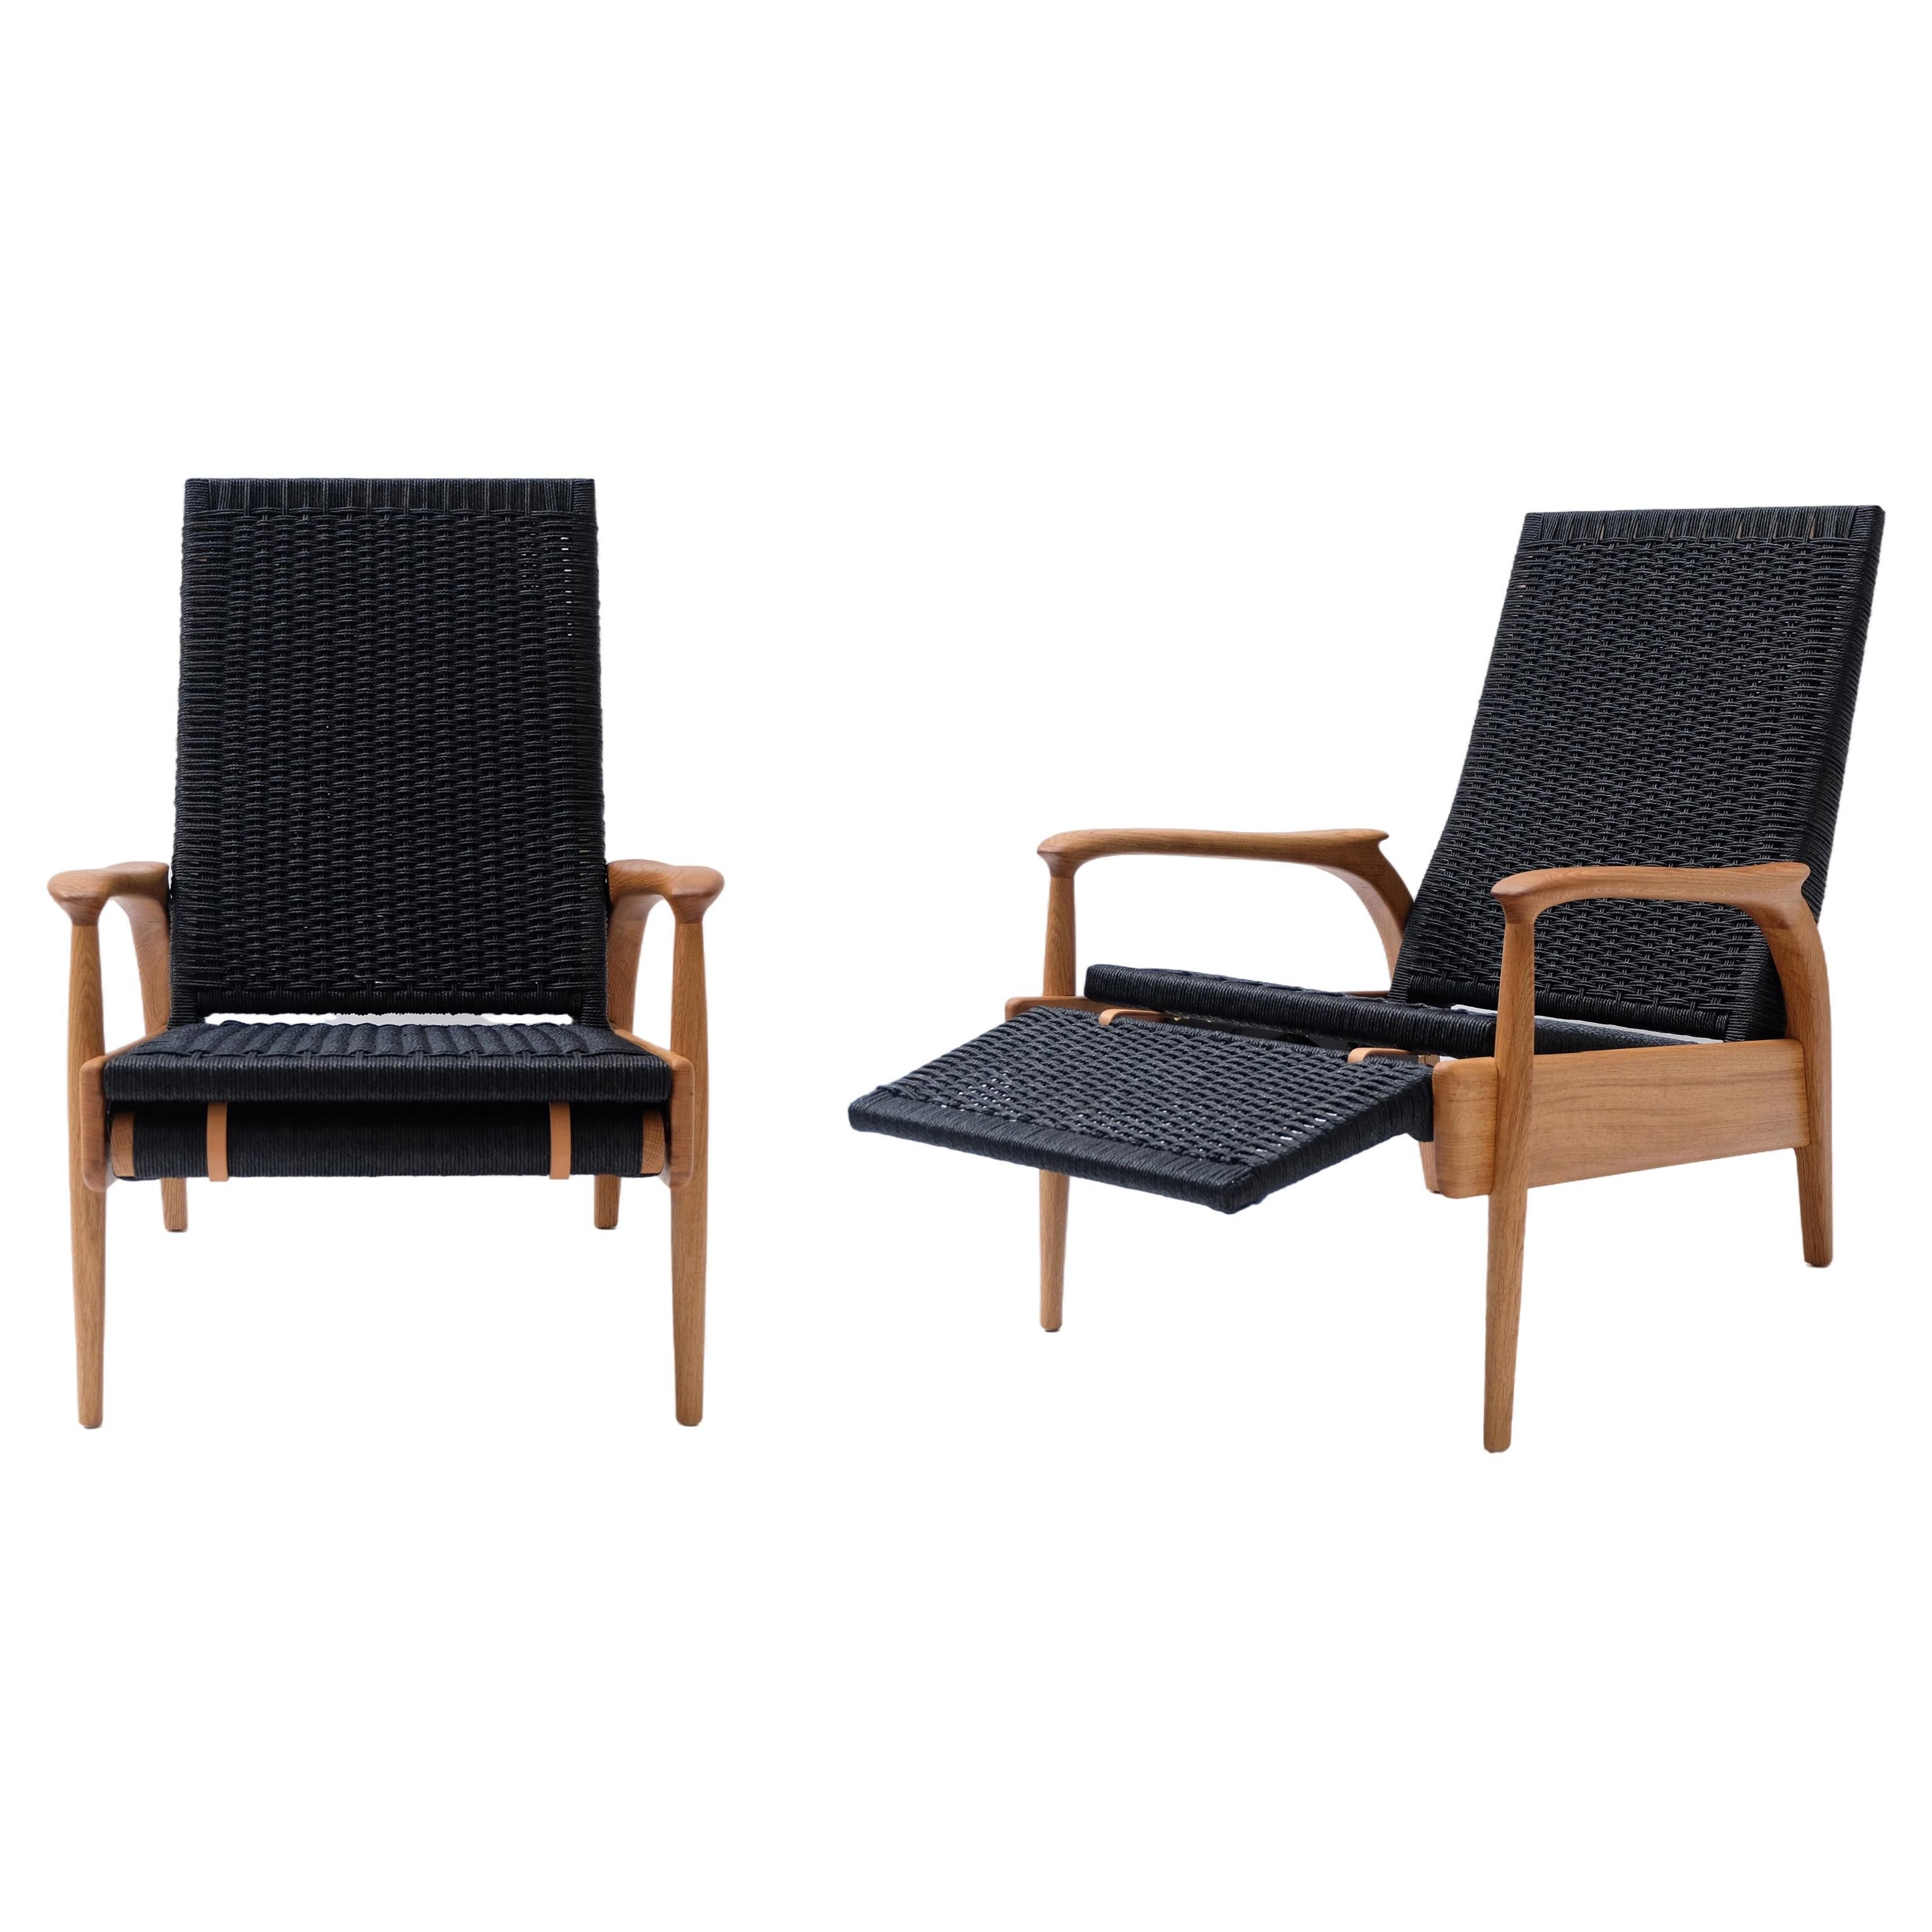 Pair of Custom-Made Reclining Lounge Chairs in Oiled Oak& Black Danish Cord